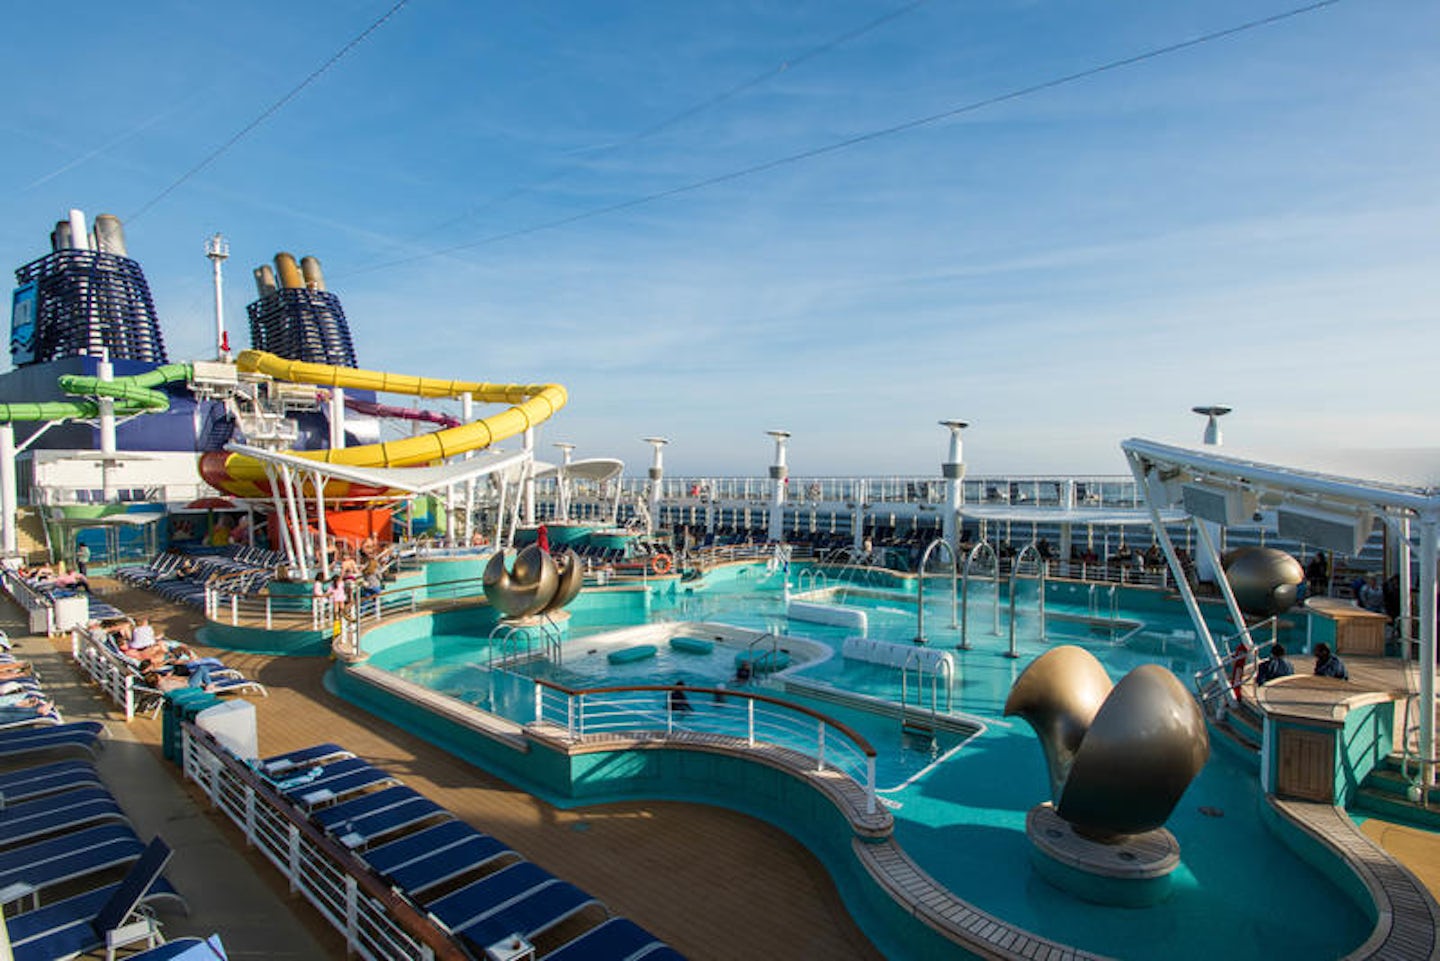 cruise ship with biggest pool